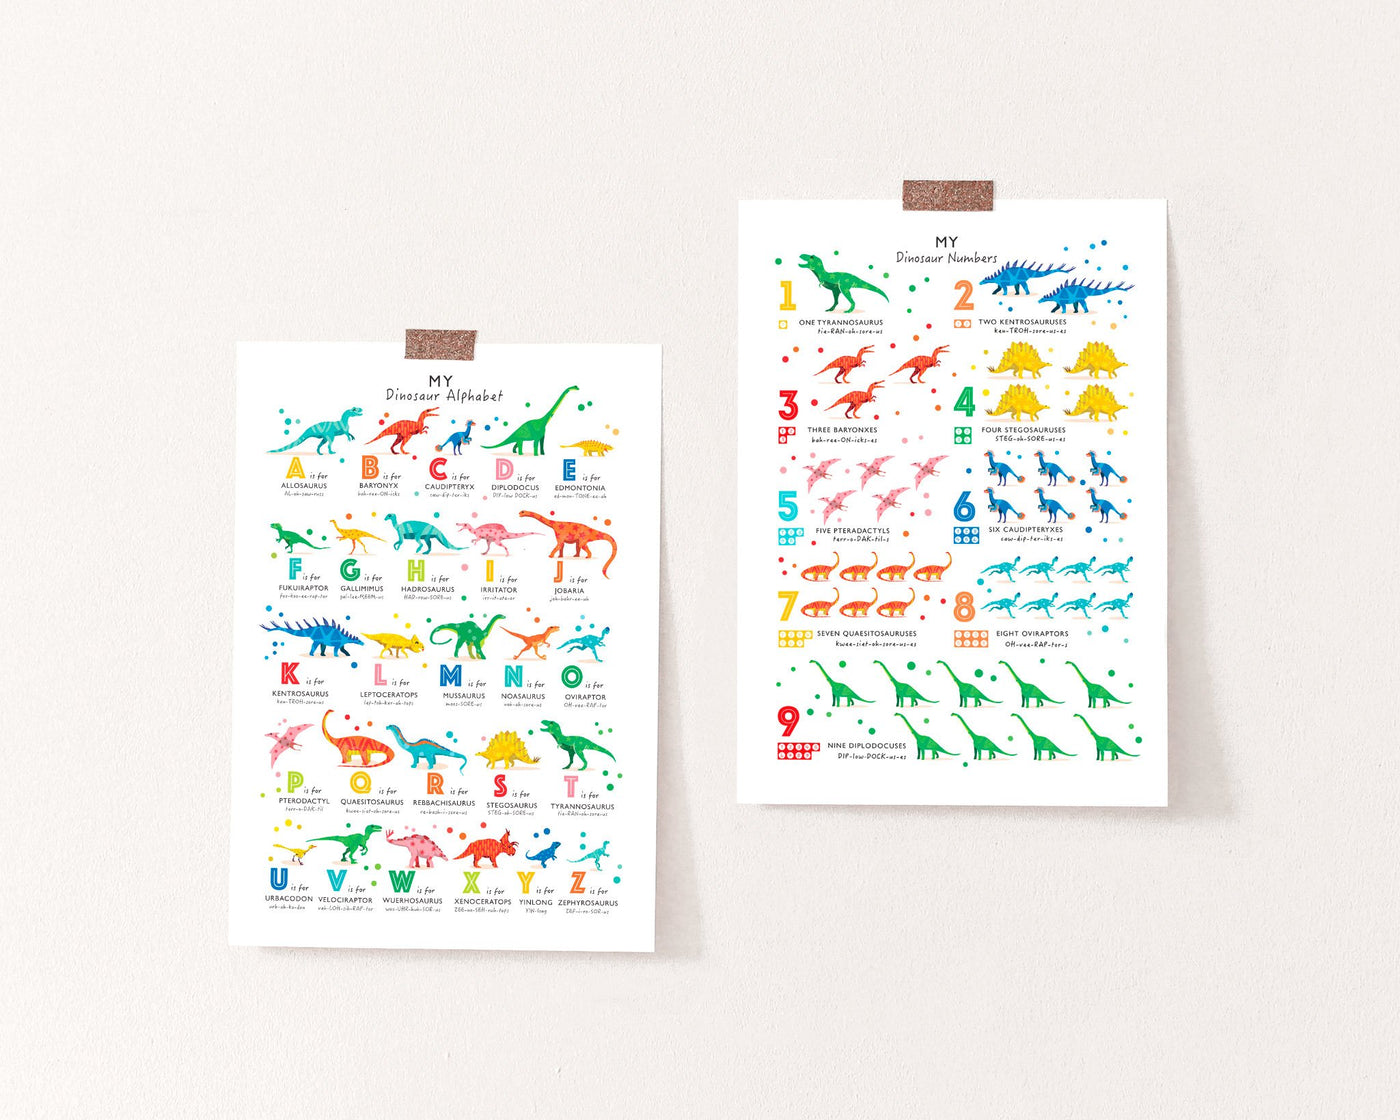 Bright Dinosaur Alphabet and Numbers Print Set of Two - PaperPaintPixels